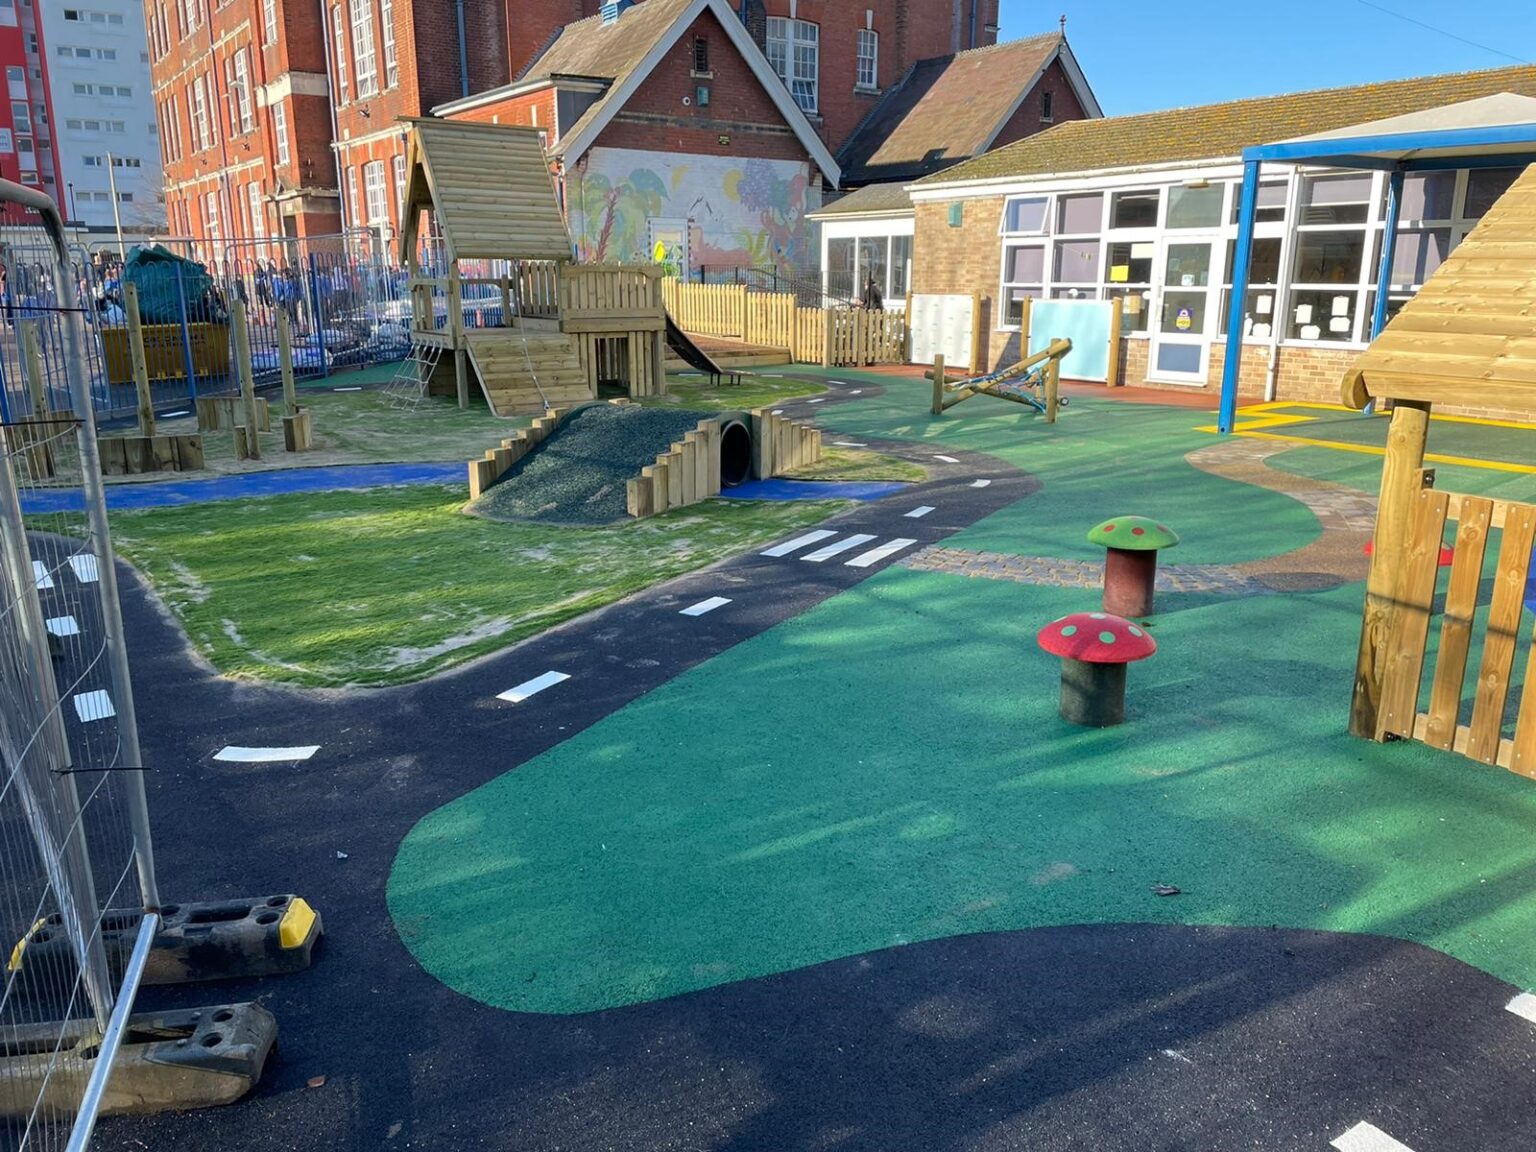 St Mary’s C of E Primary School, Southampton race track rubber surfacing design